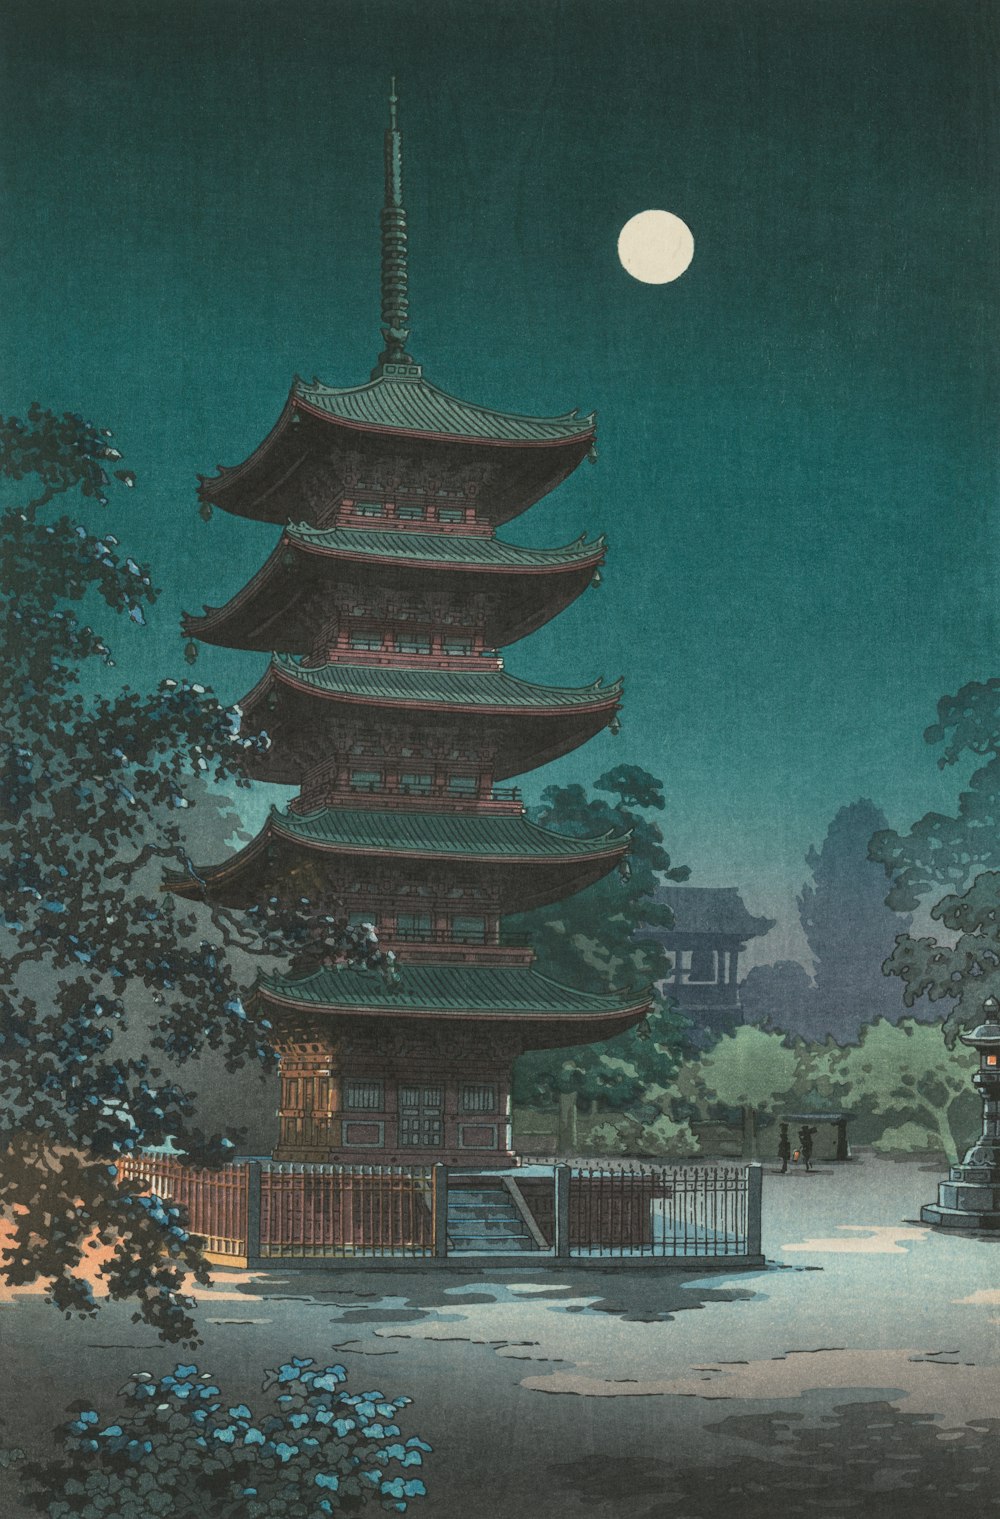 a painting of a pagoda with a full moon in the background